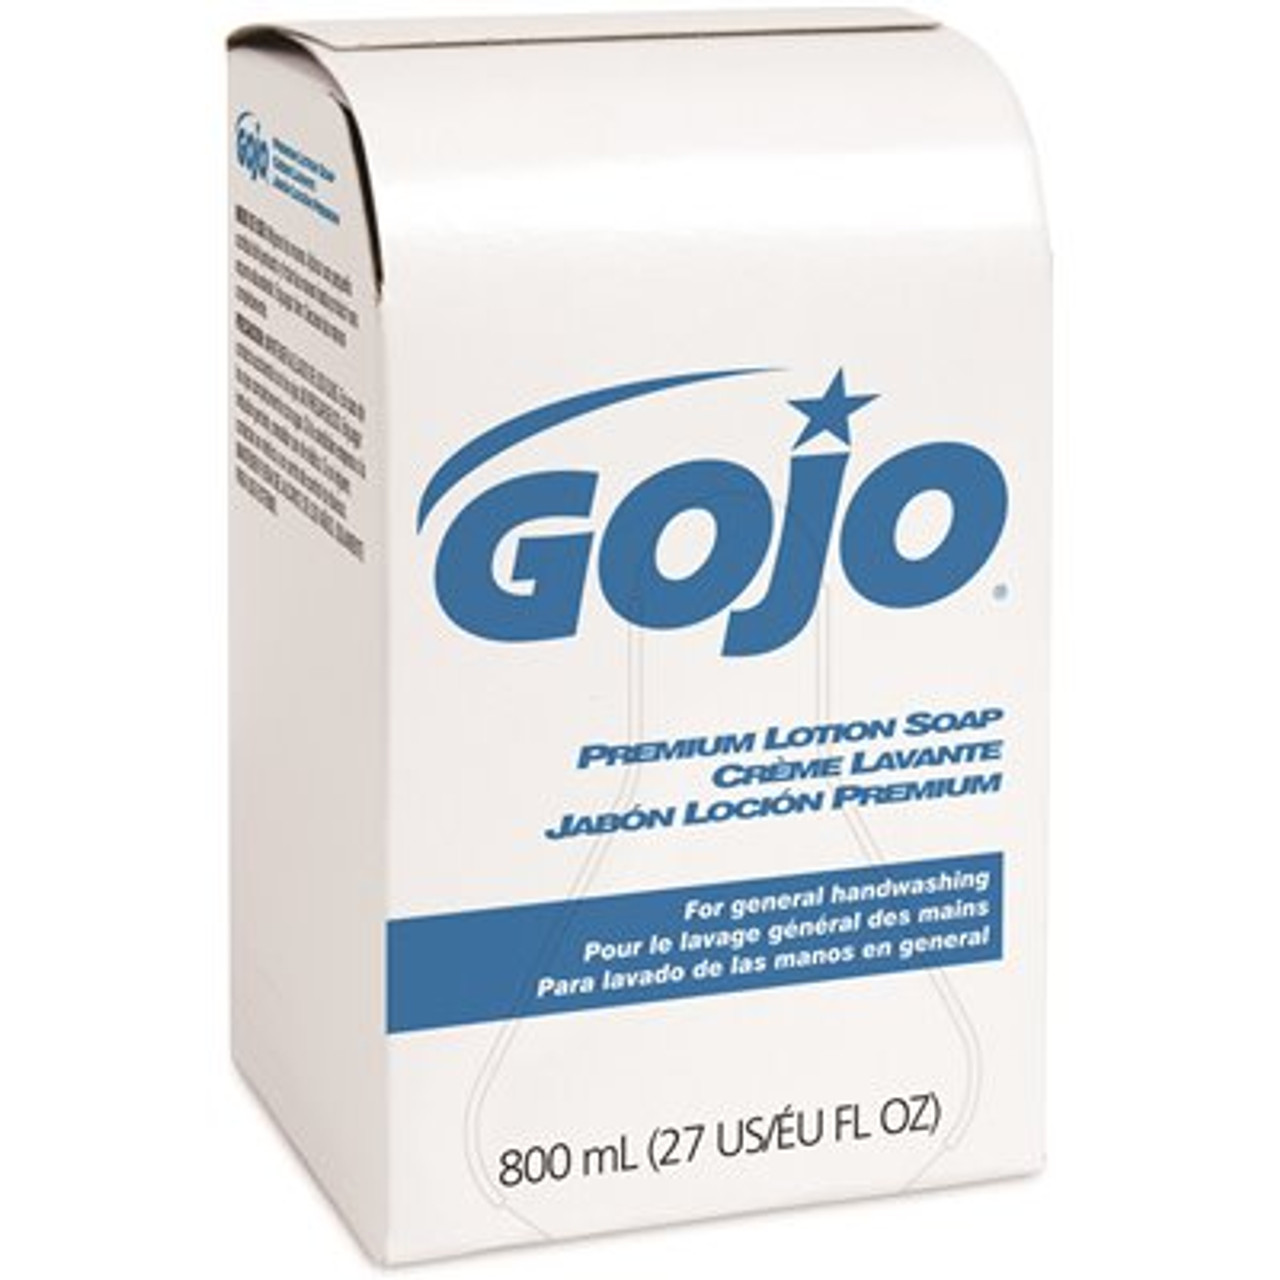 GoJo Bag-In Box Premium Lotion Soap, 800 mL refill Waterfall Fragrance, Lotion Hand Soap (Pack of 12) - 9106-12